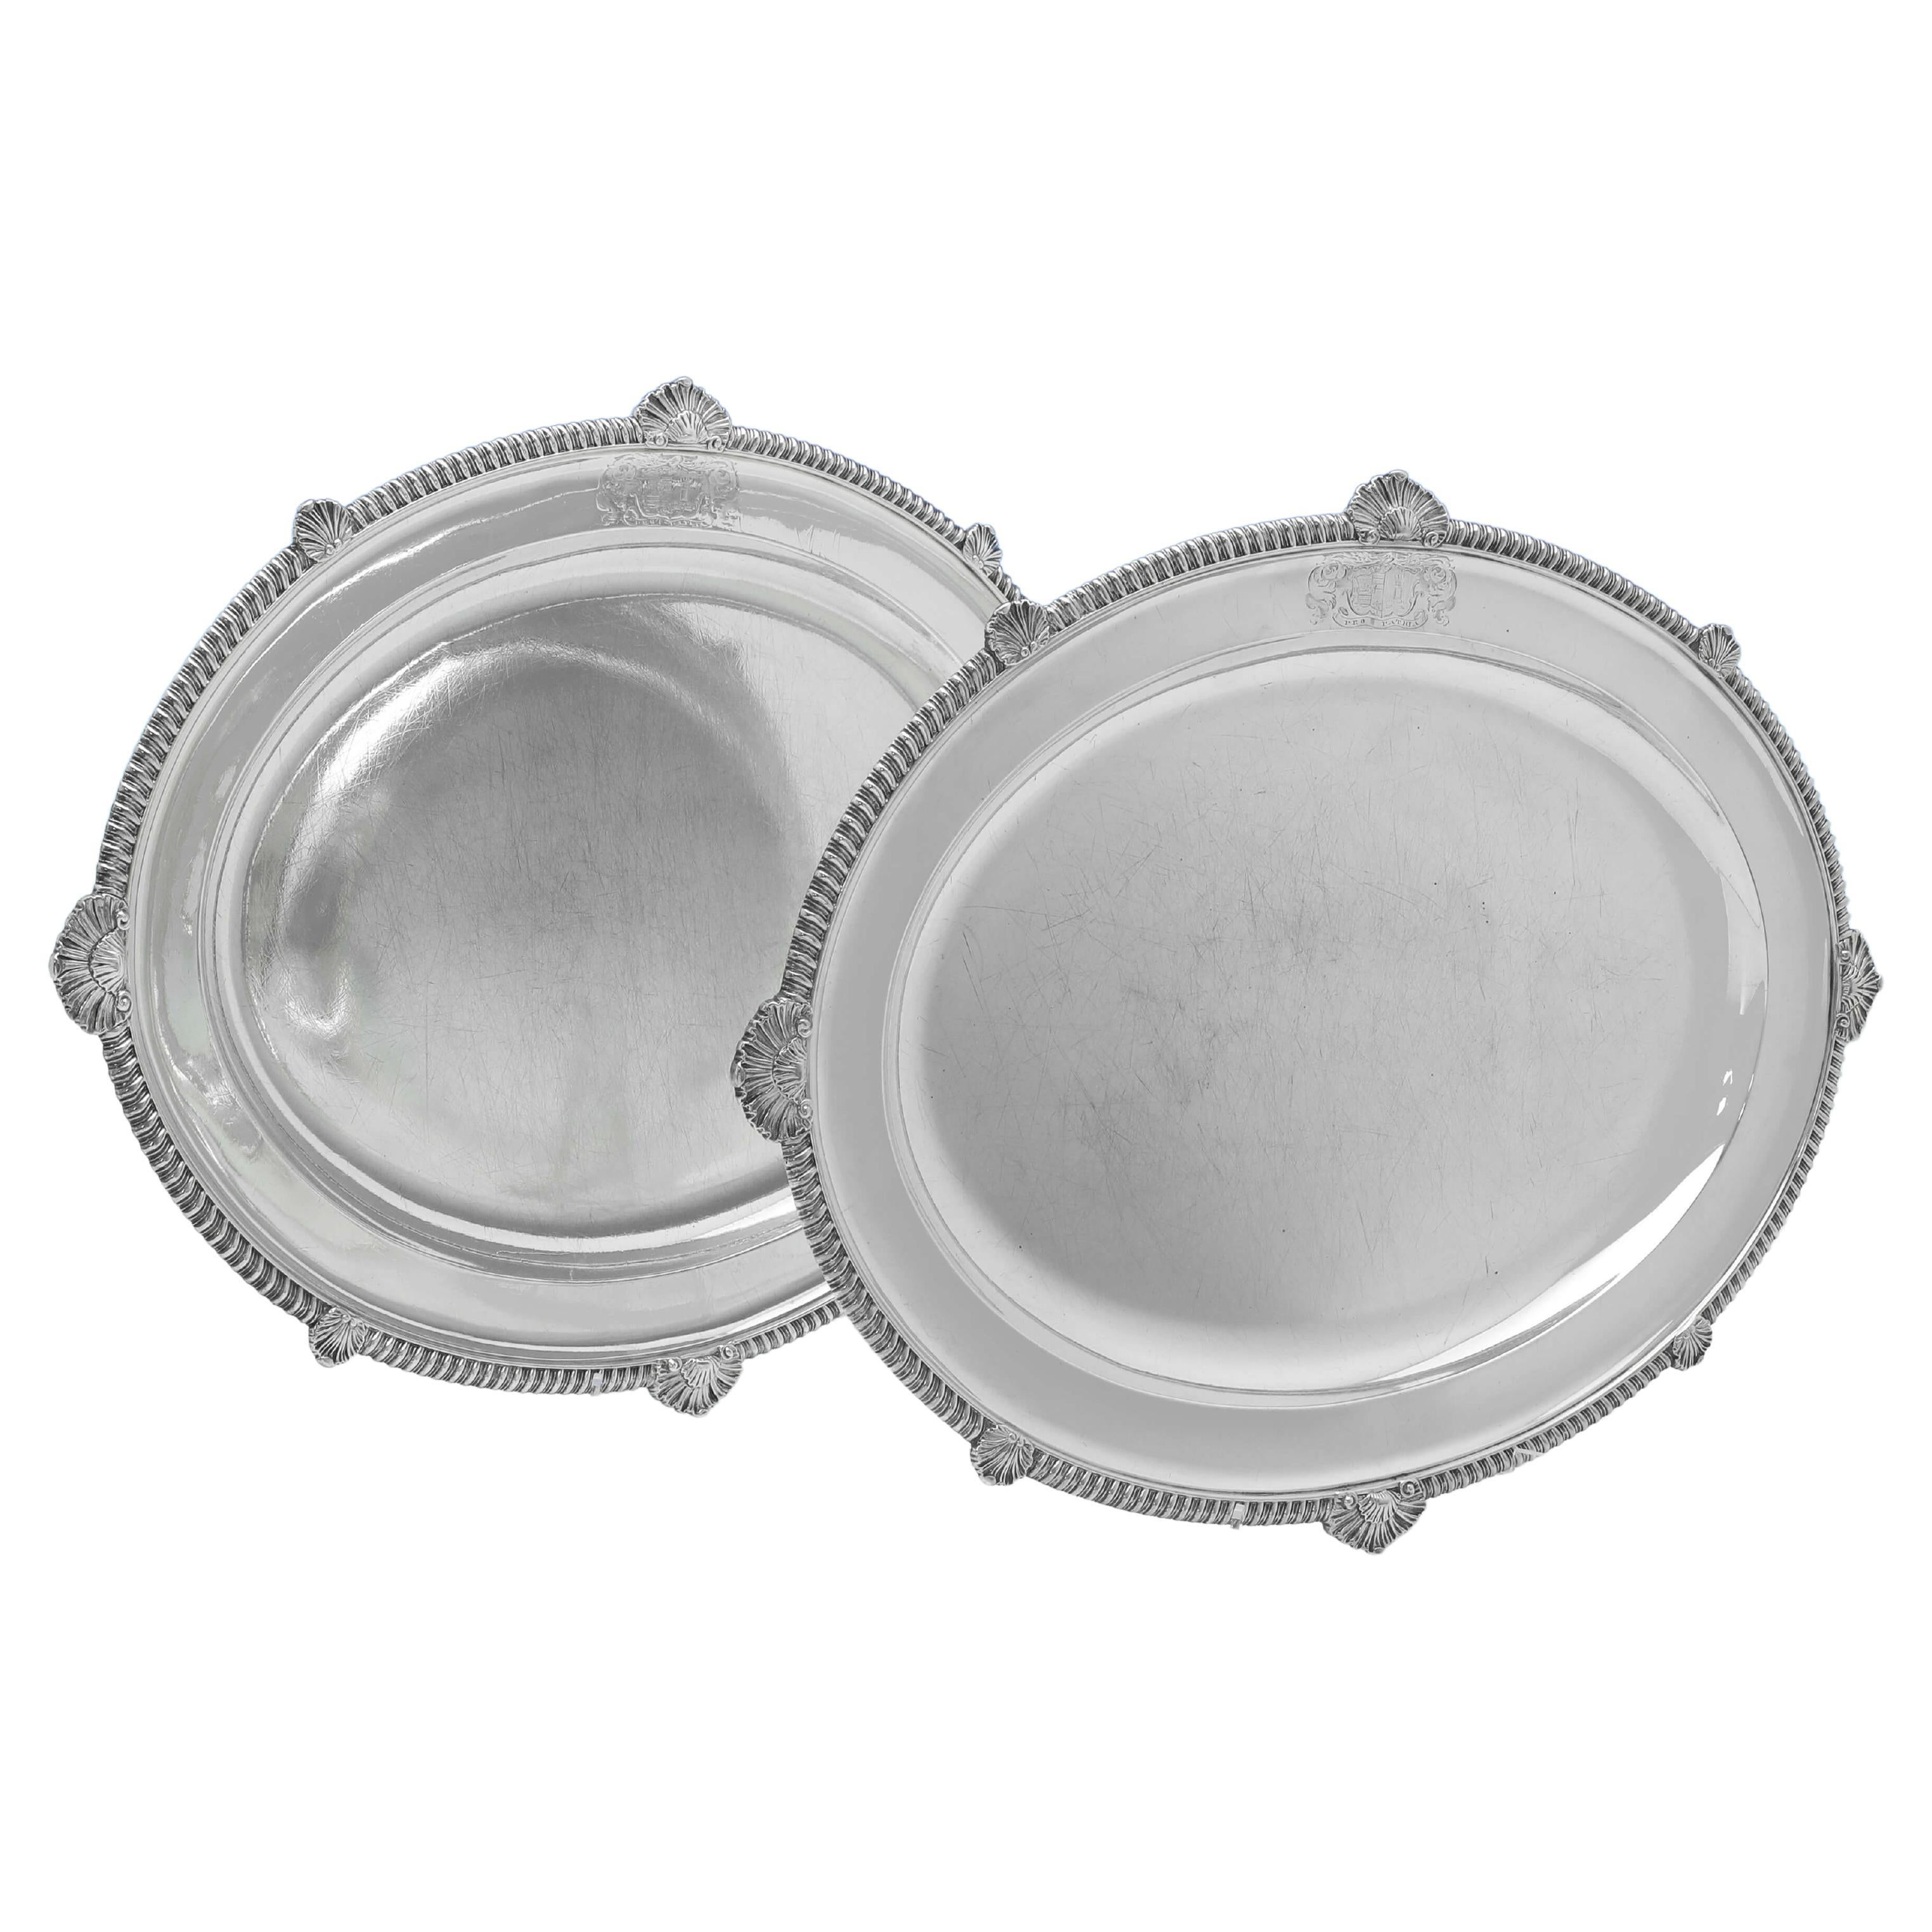 Regency Design Pair of Antique Sterling Silver Meat Dishes, London 1822